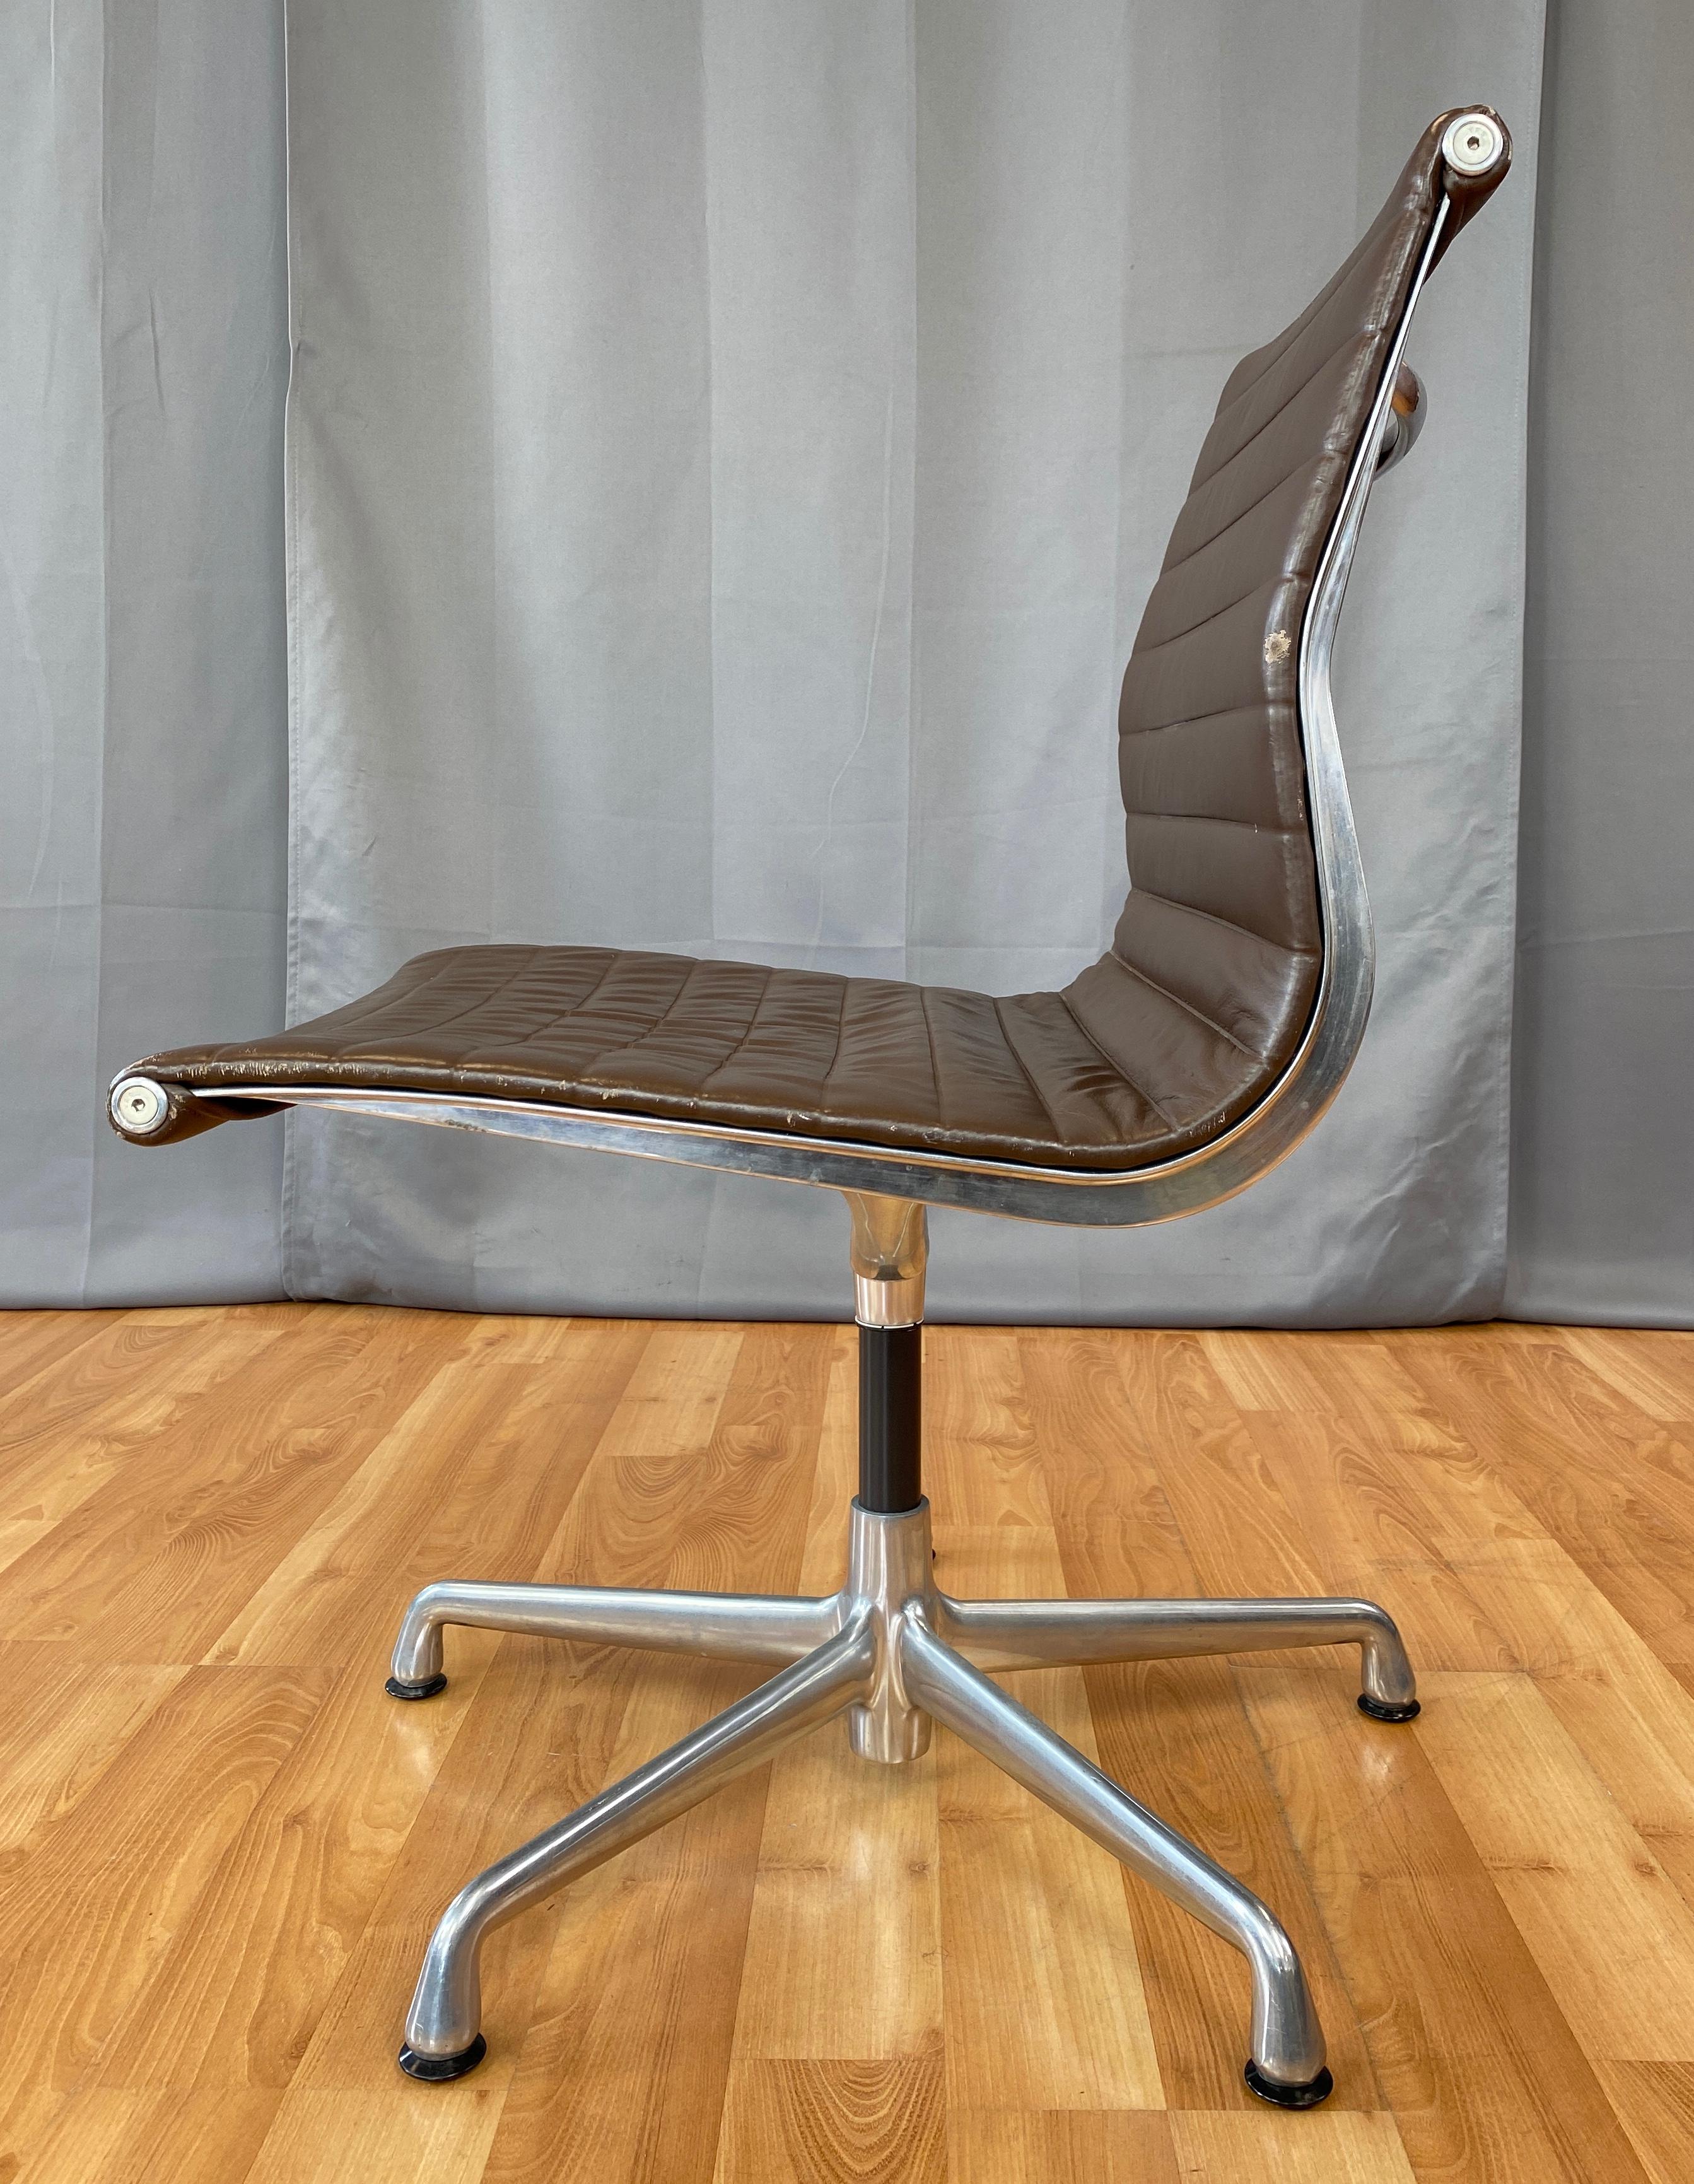 American Eames Aluminum Group Side Chair, in Brown Leather 5 Star Base